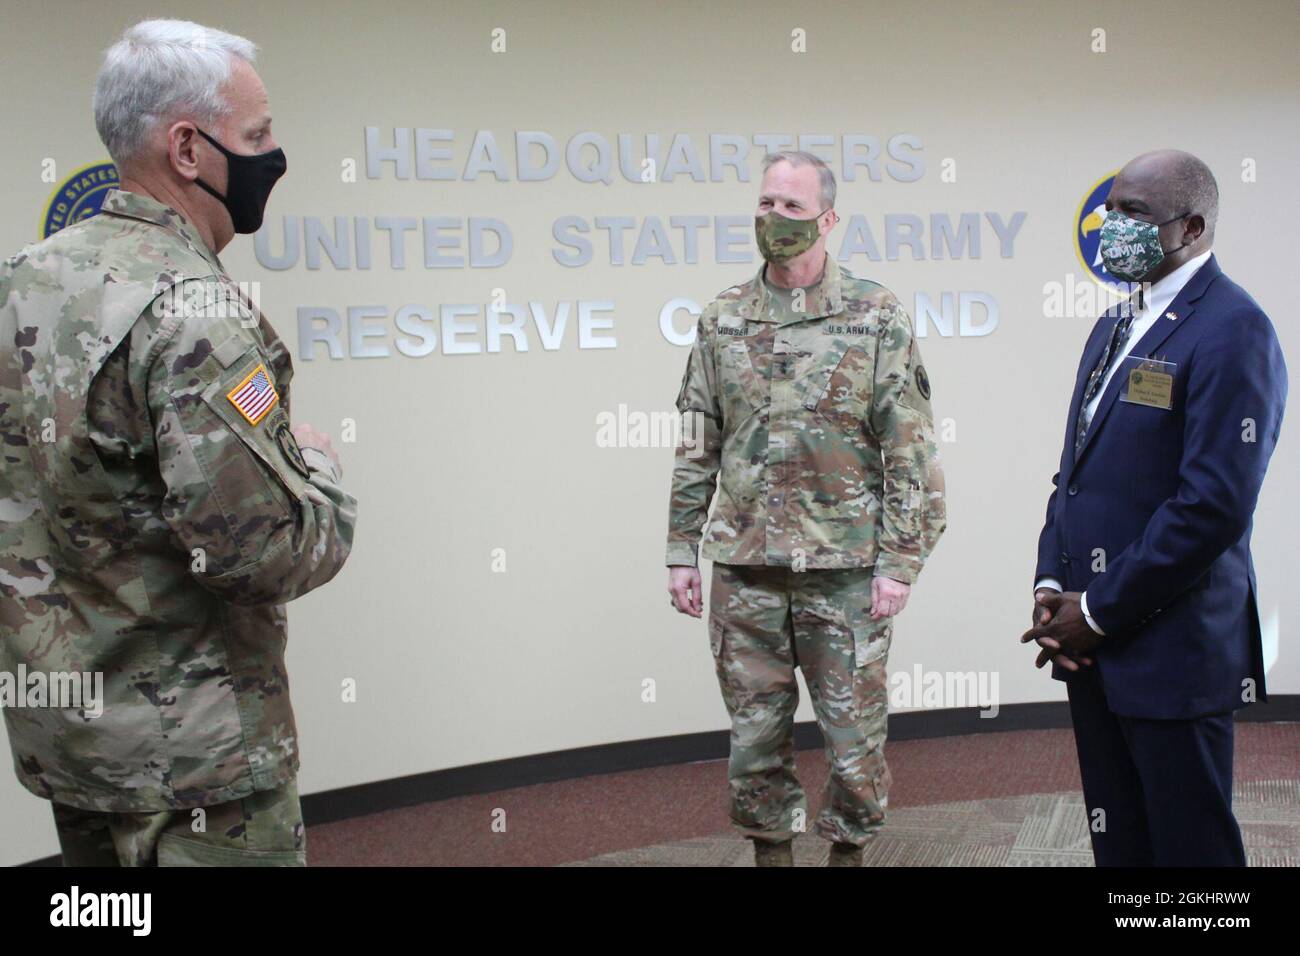 Maj. Gen. Gregory J. Mosser, center, deputy commanding general, U.S. Army Reserve Command, and Brig. Gen. Robert S. Cooley Jr., left, U.S. Army Reserve Command chief of staff, welcome retired United States Marine Corps Lt. Gen. Walter Gaskin to U.S. Army Reserve Command headquarters at Fort Bragg, N.C., April 27, 2021. Gaskin currently serves as secretary of the North Carolina Department of Military and Veterans Affairs. Stock Photo